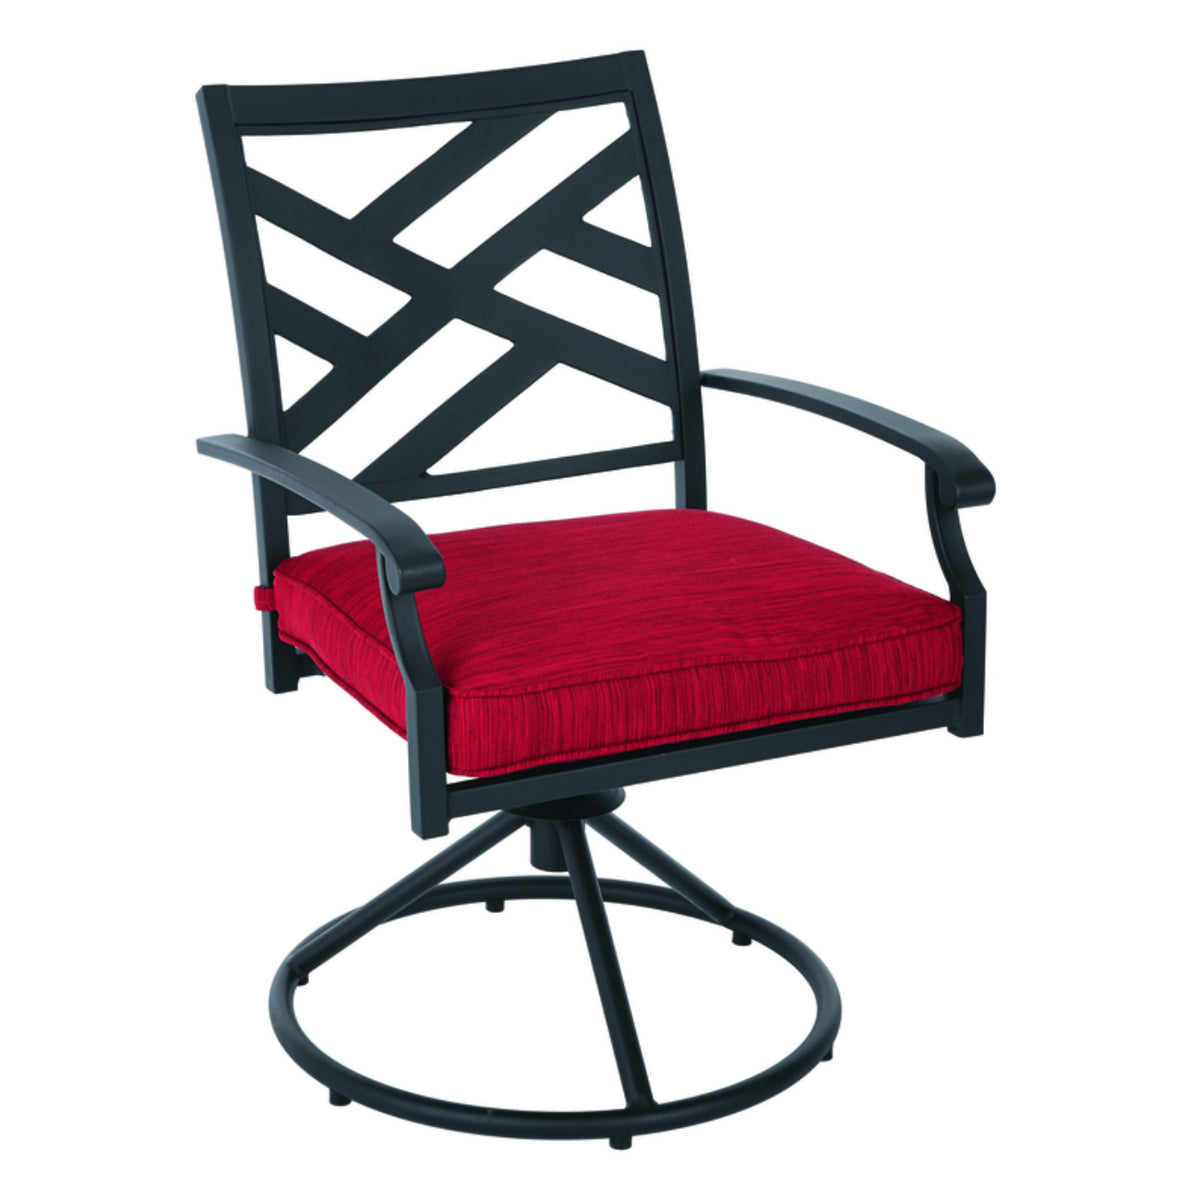 buy outdoor patio sets at cheap rate in bulk. wholesale & retail outdoor living products store.